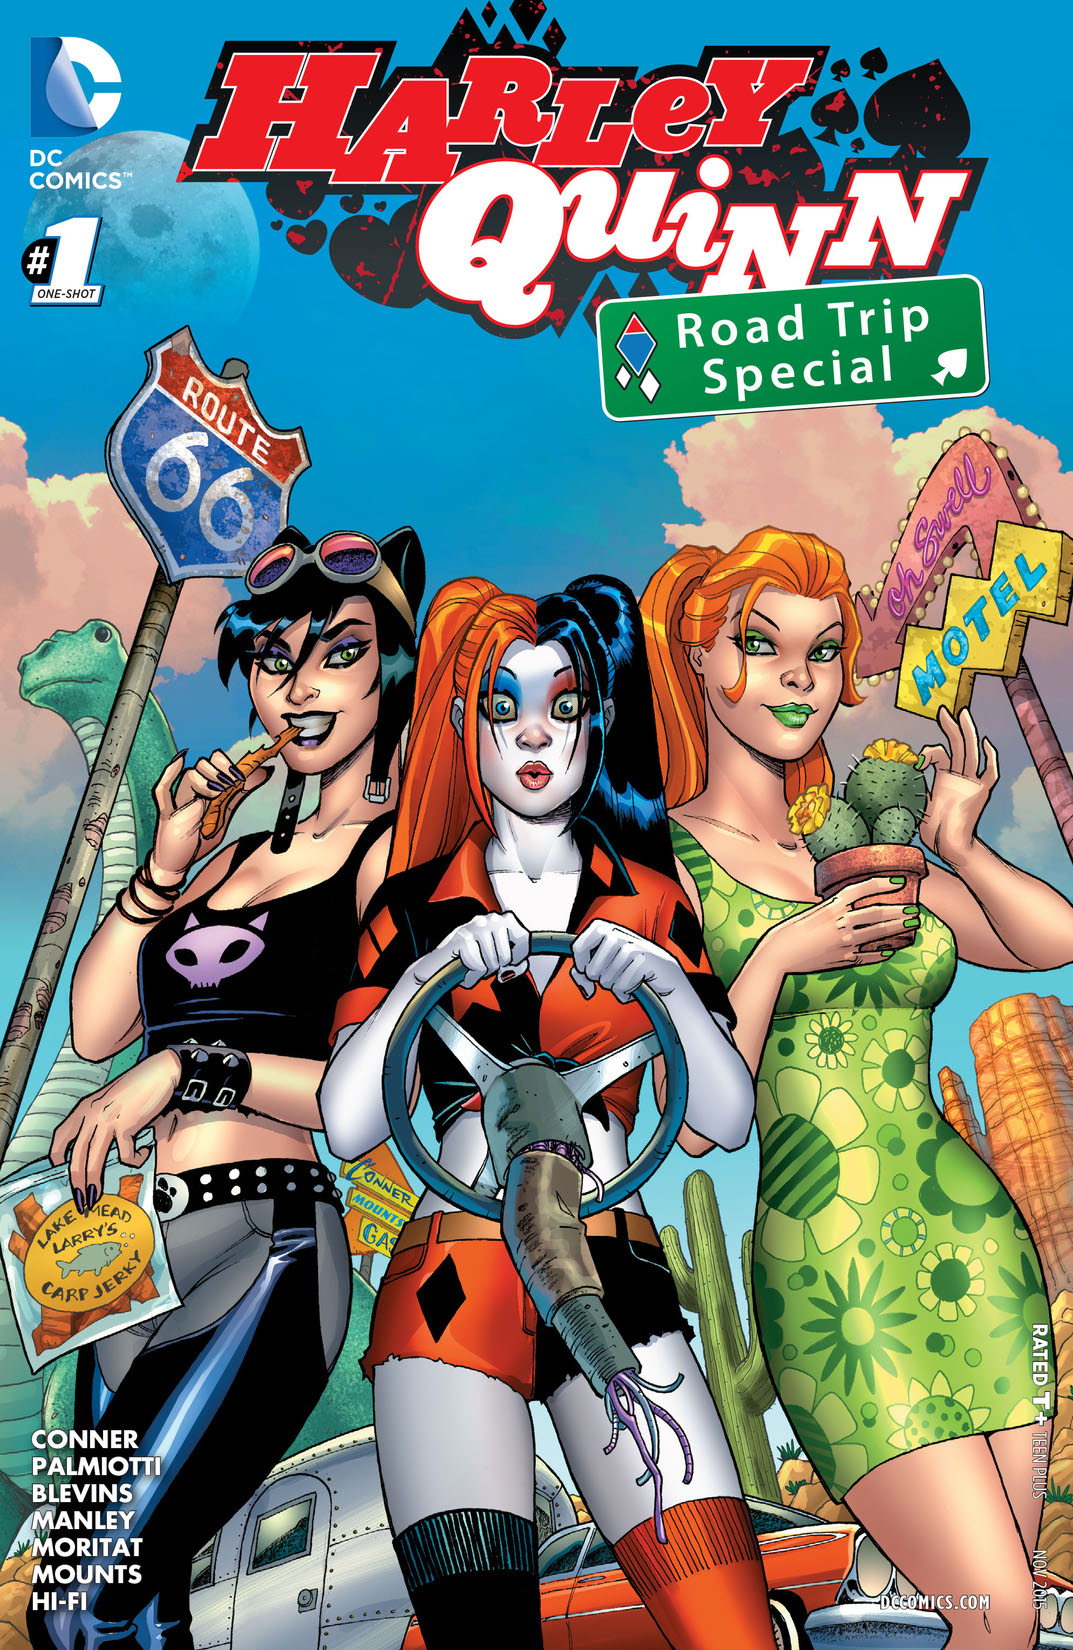 Harley Quinn Road Trip Special (2015-) #1 preview images